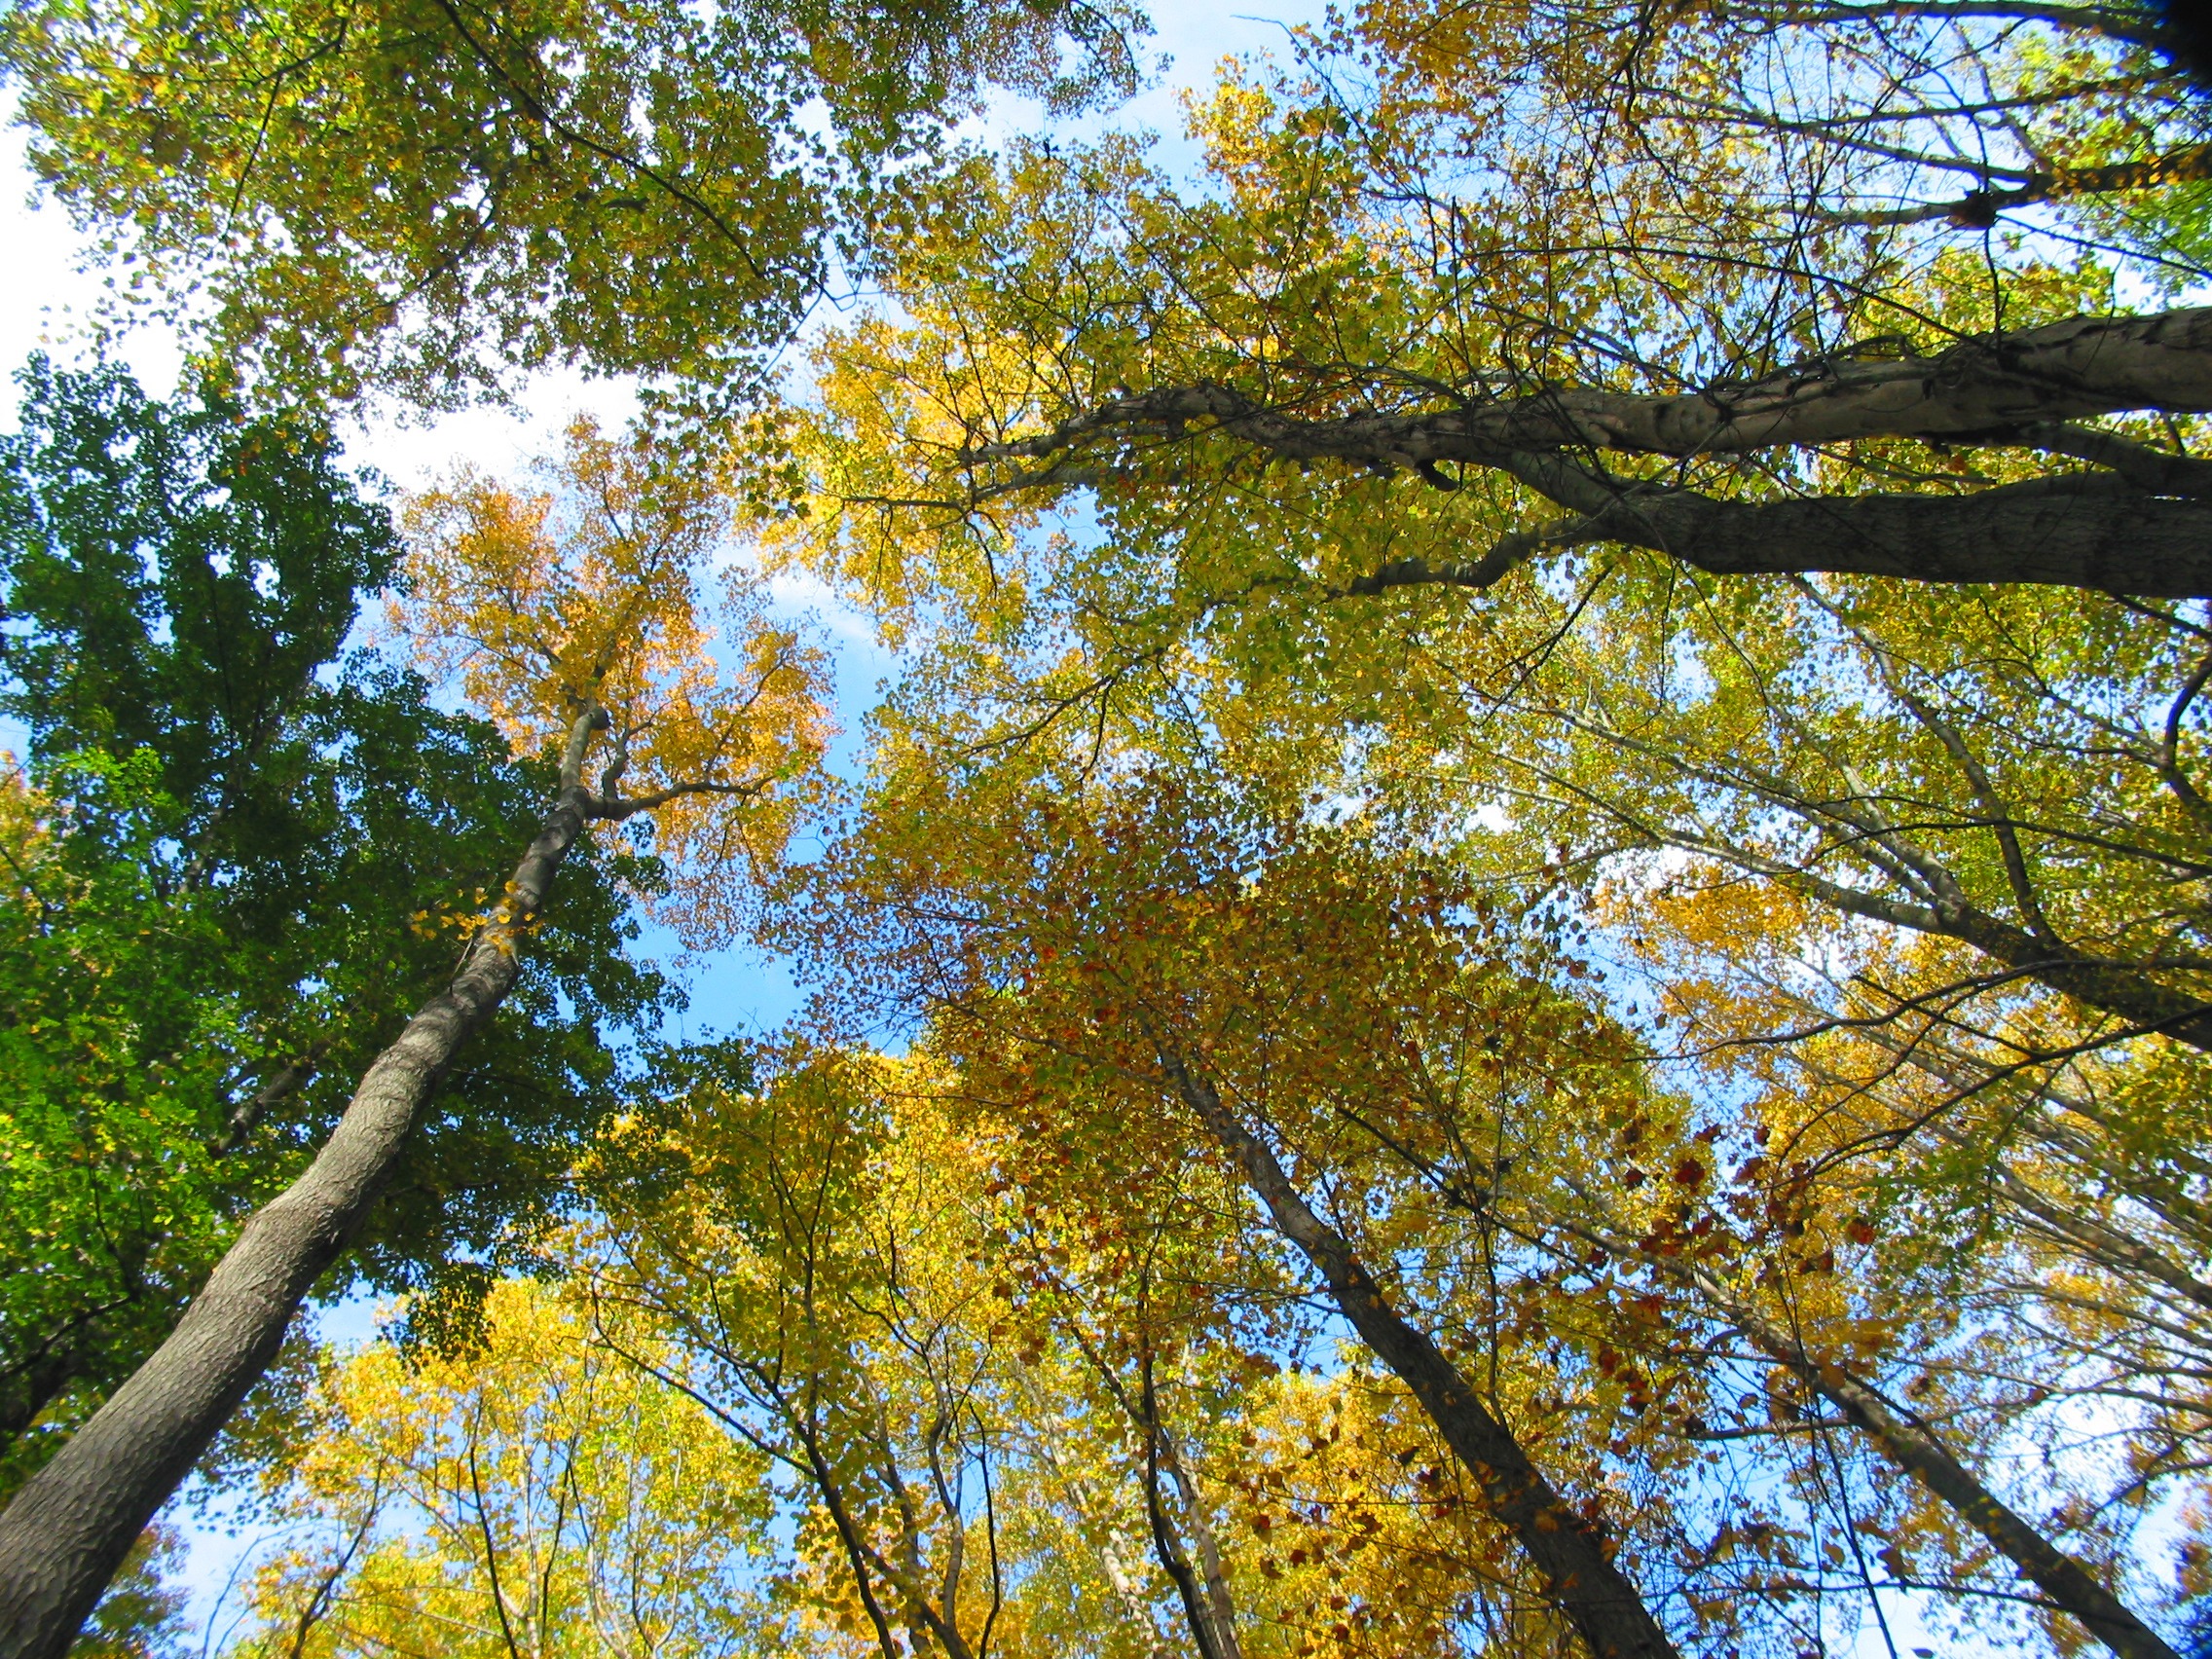 Tall trees with fall leaves are against a light blue sky.